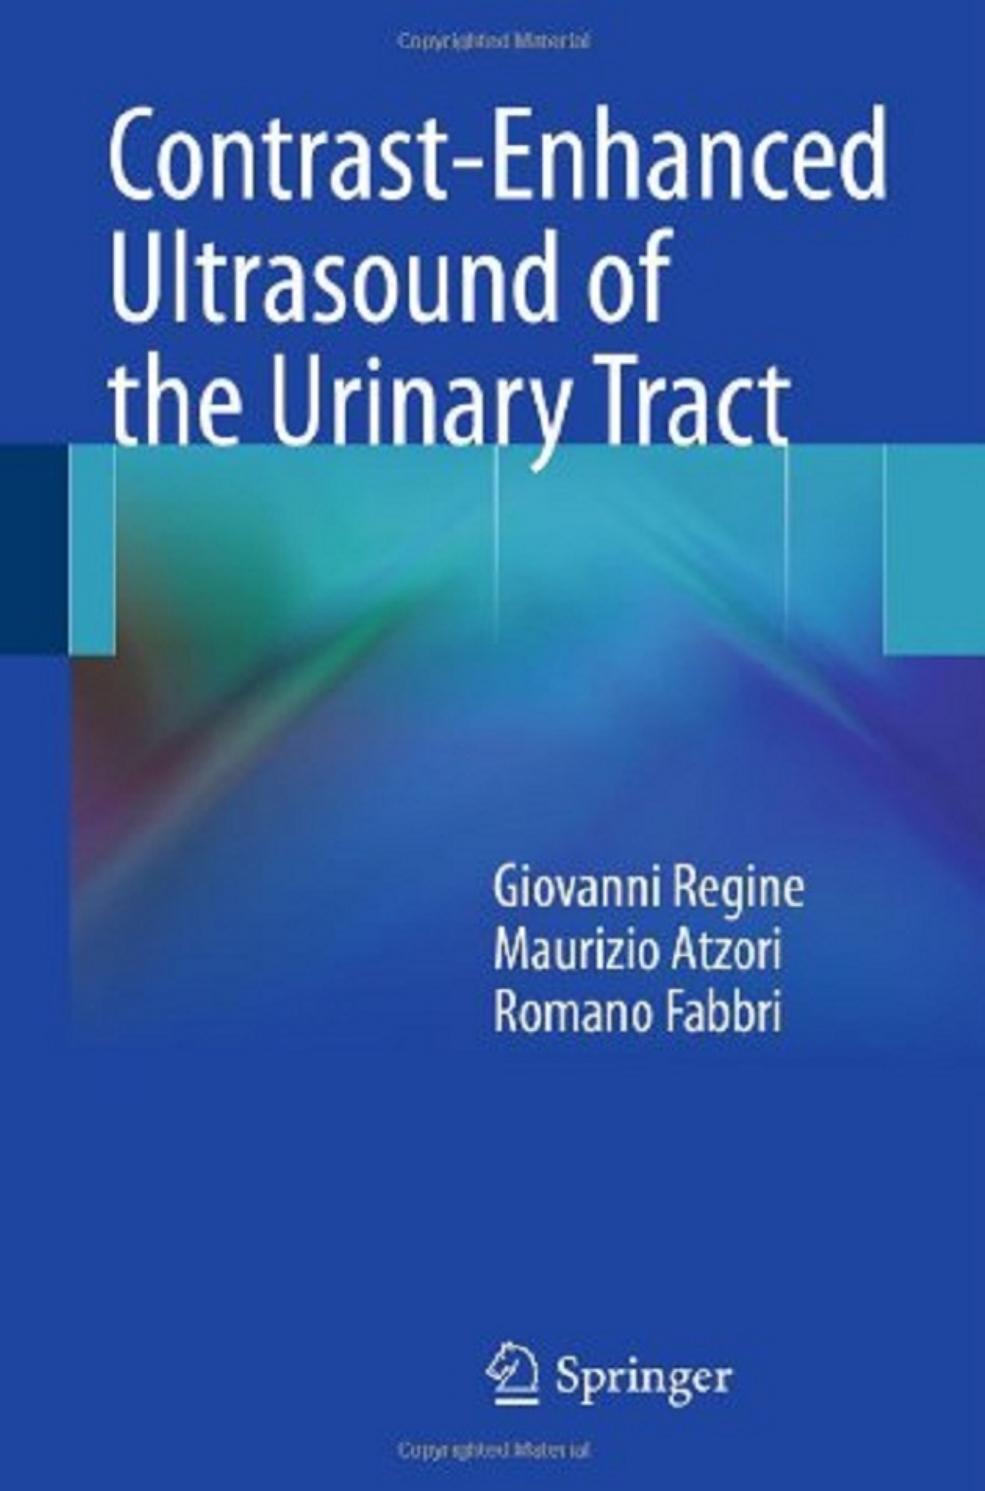 Contrast-Enhanced Ultrasound of the Urinary Tract.jpg